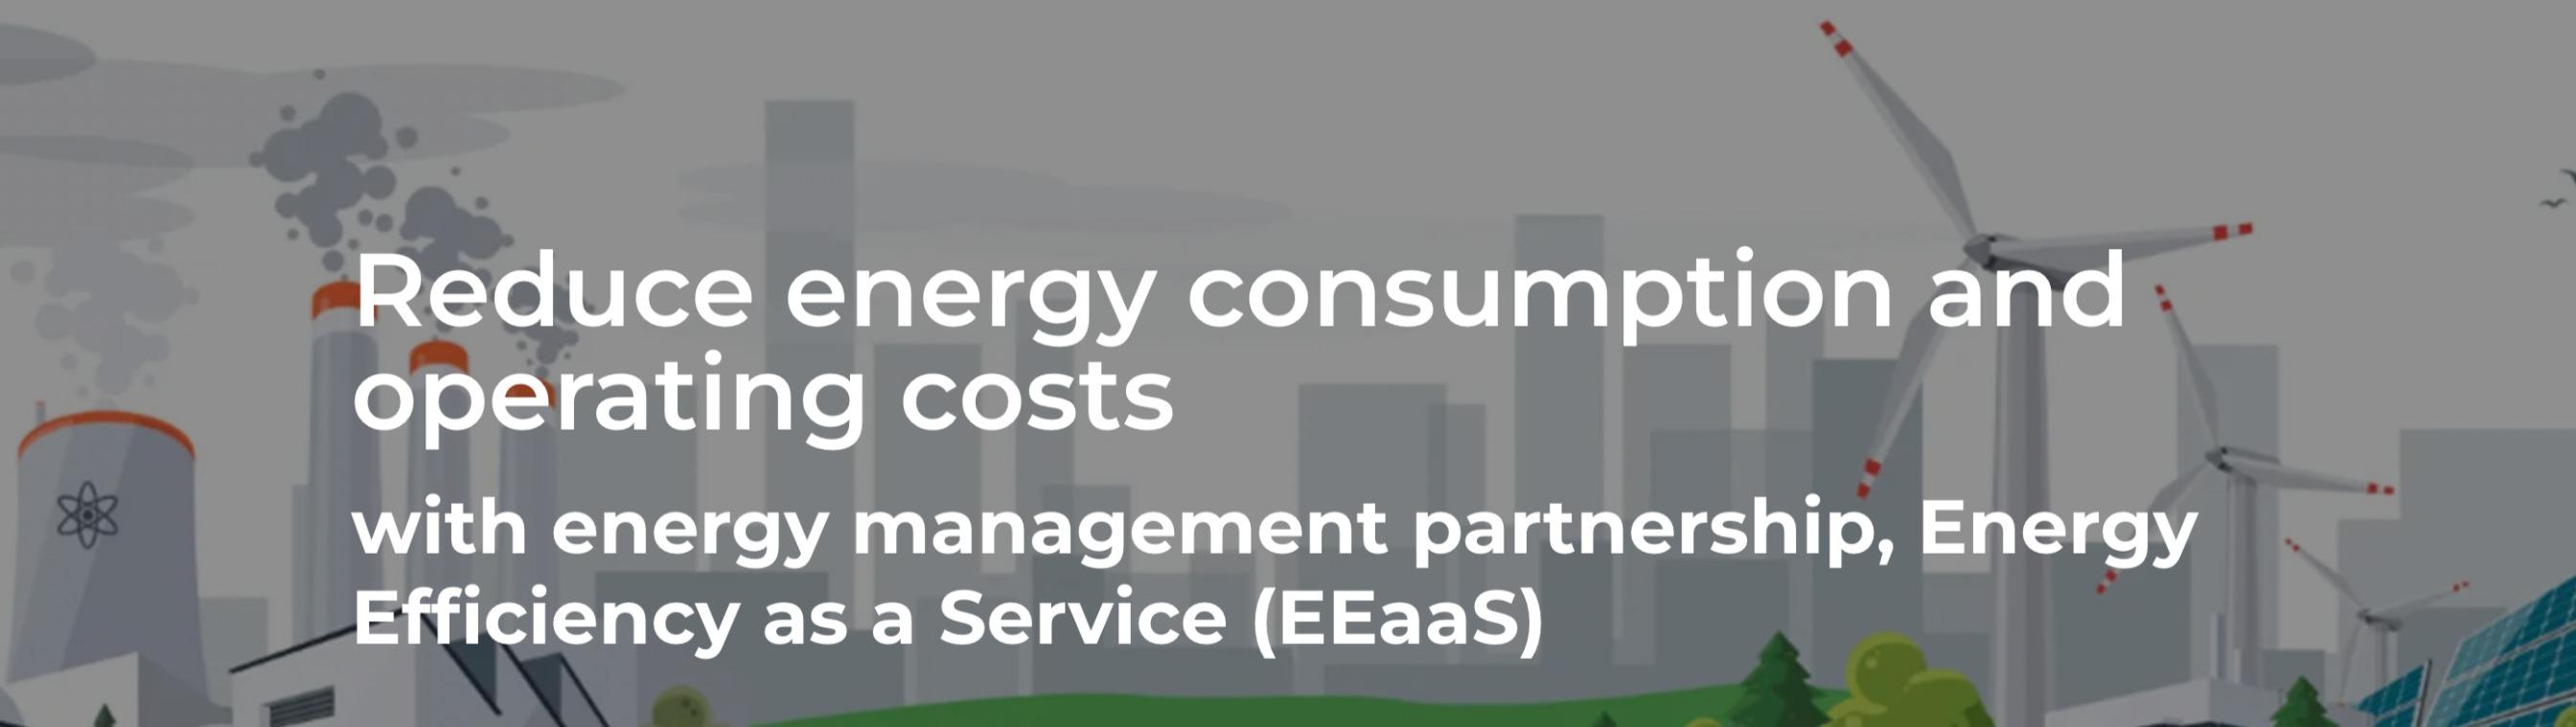 Image for Energy Efficiency as a Service (EEaaS)